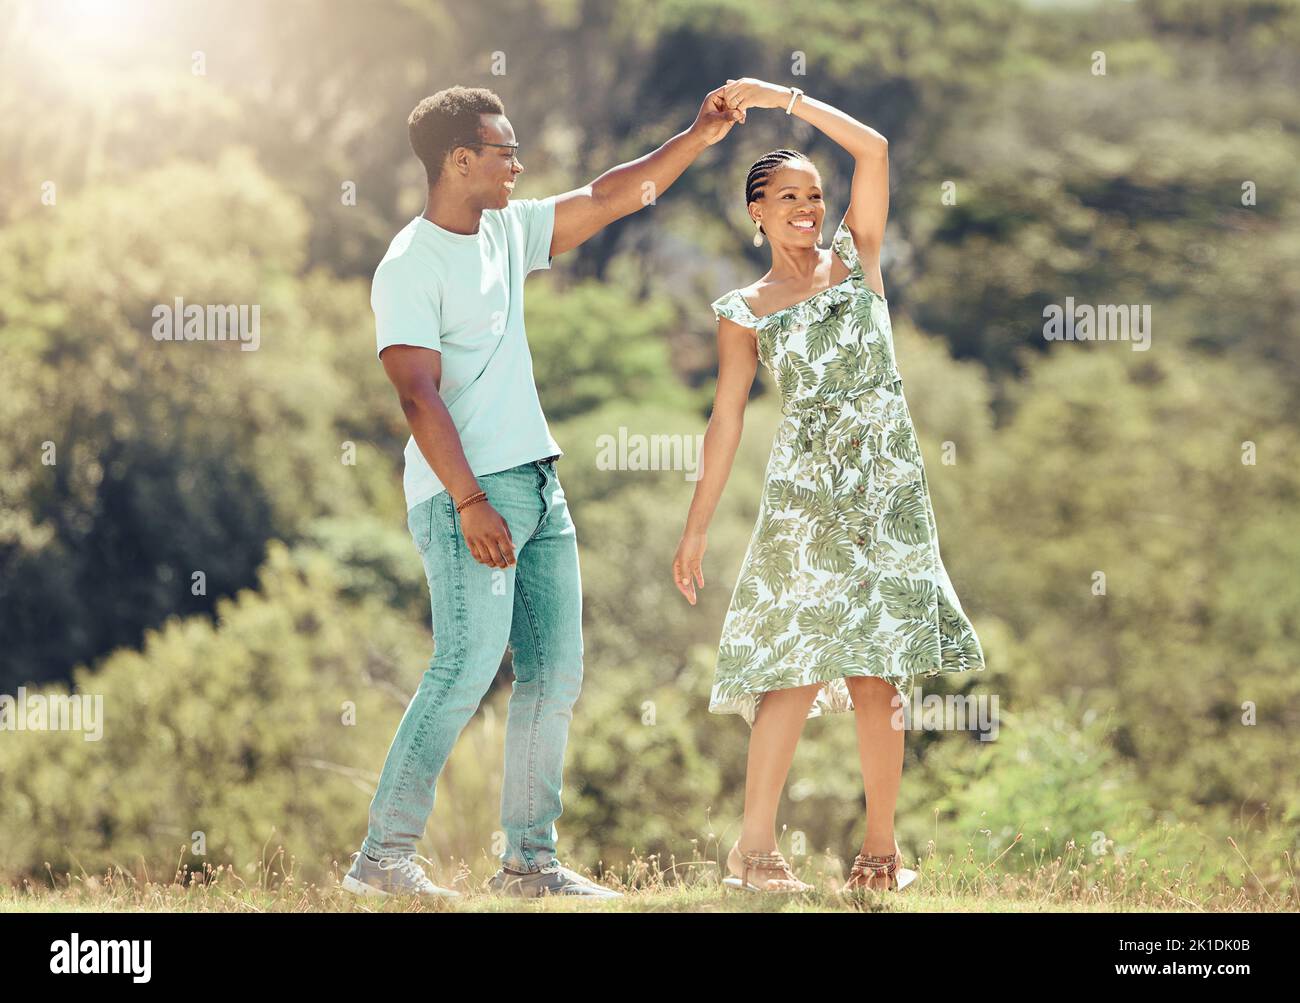 Love, freedom and celebration by couple dancing outdoors, loving romantic getaway and bonding. Happy black man and woman being playful and sweet Stock Photo